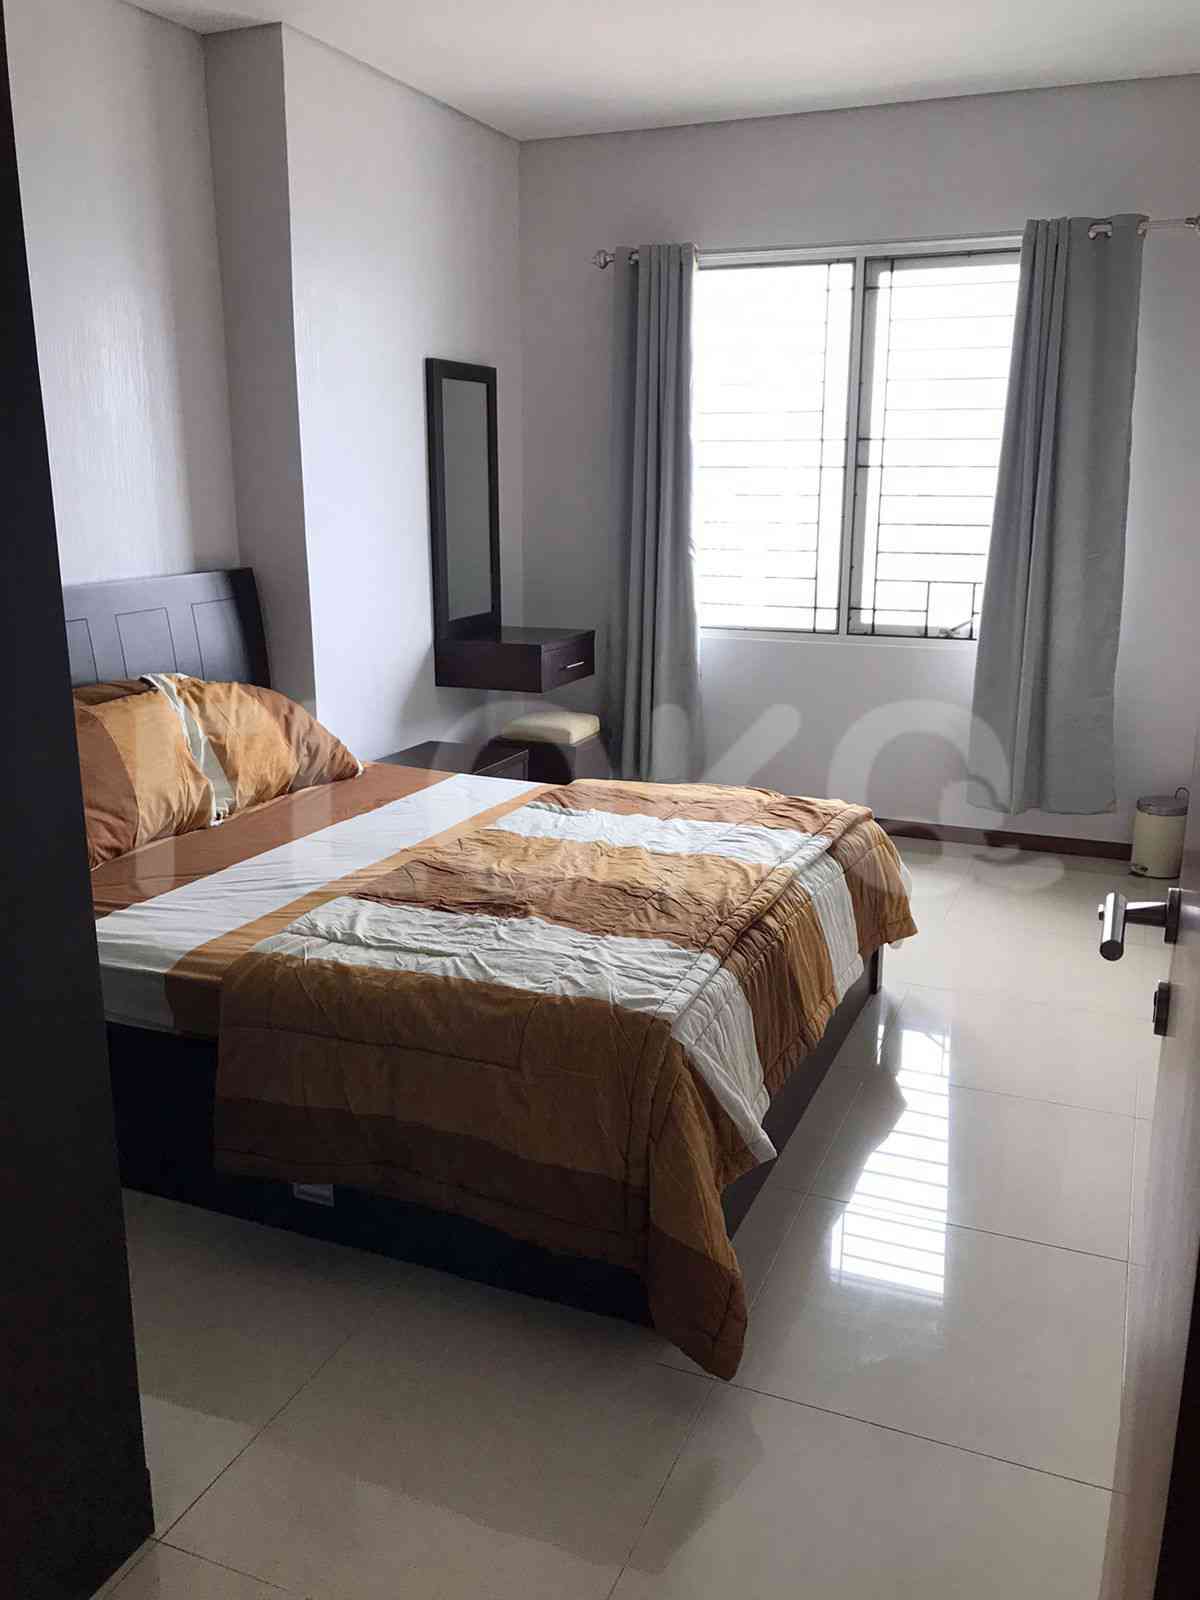 2 Bedroom on 18th Floor for Rent in Thamrin Residence Apartment - fth289 1